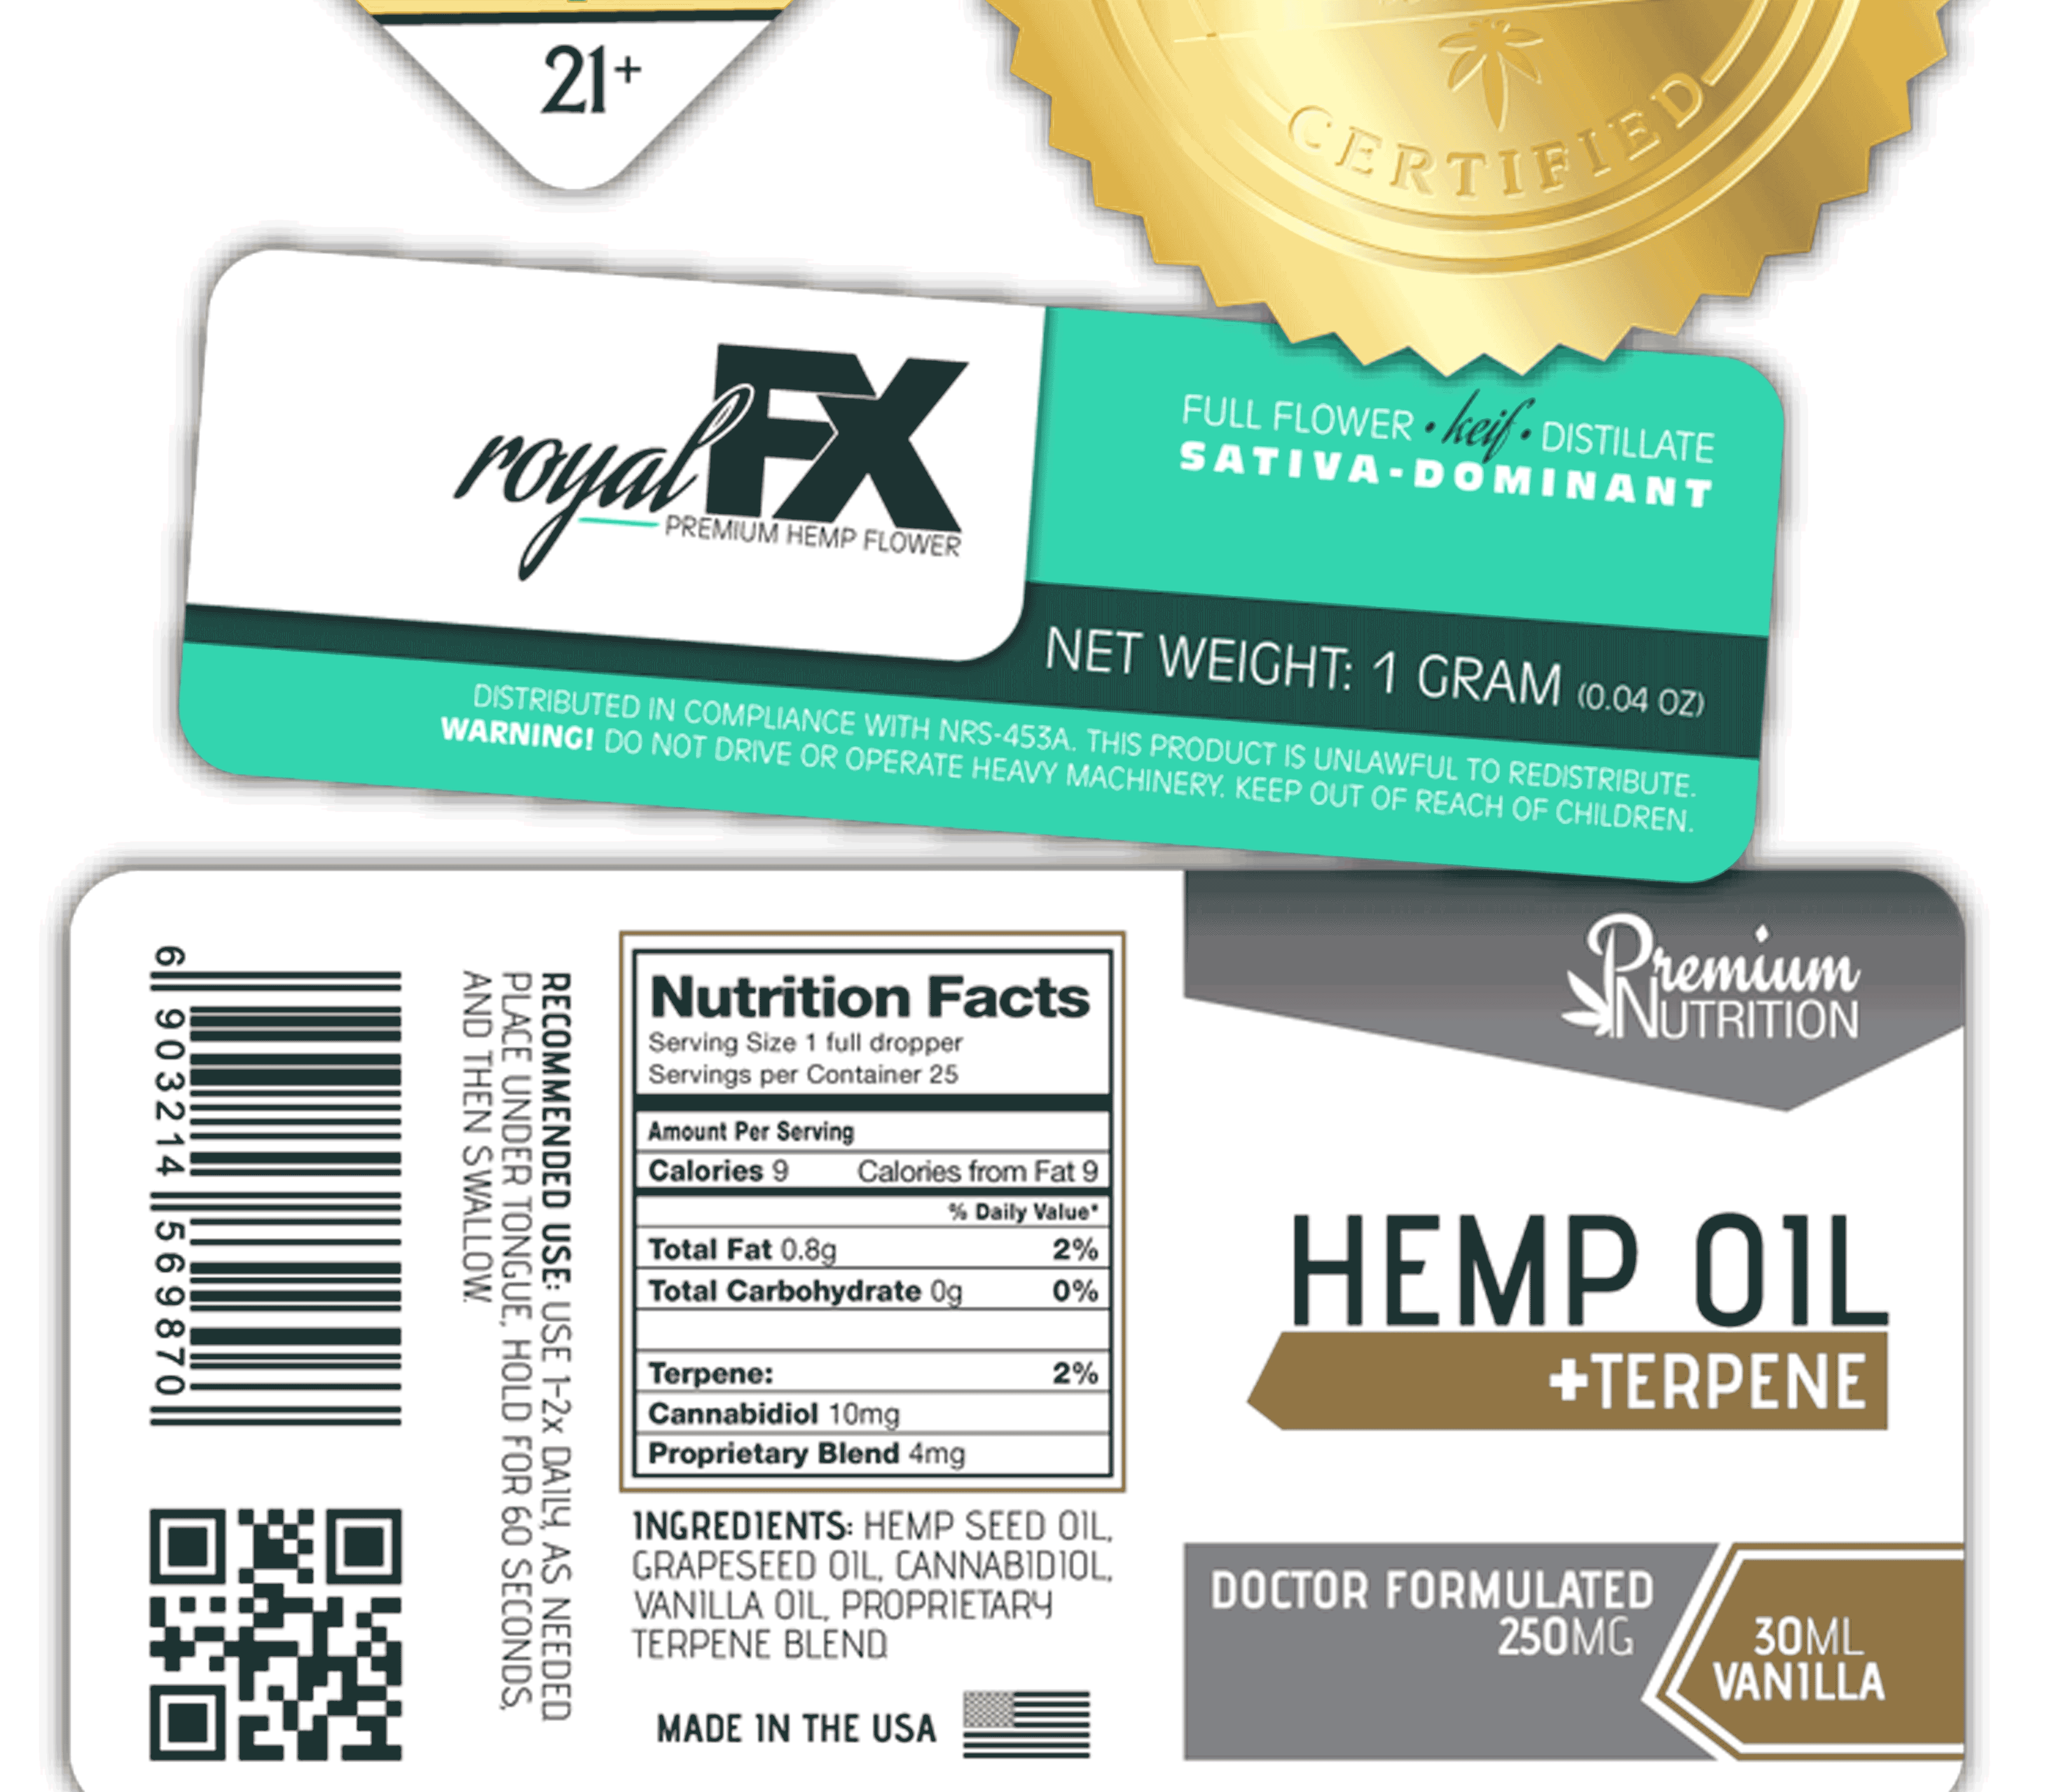 CBD and Cannabis Labels